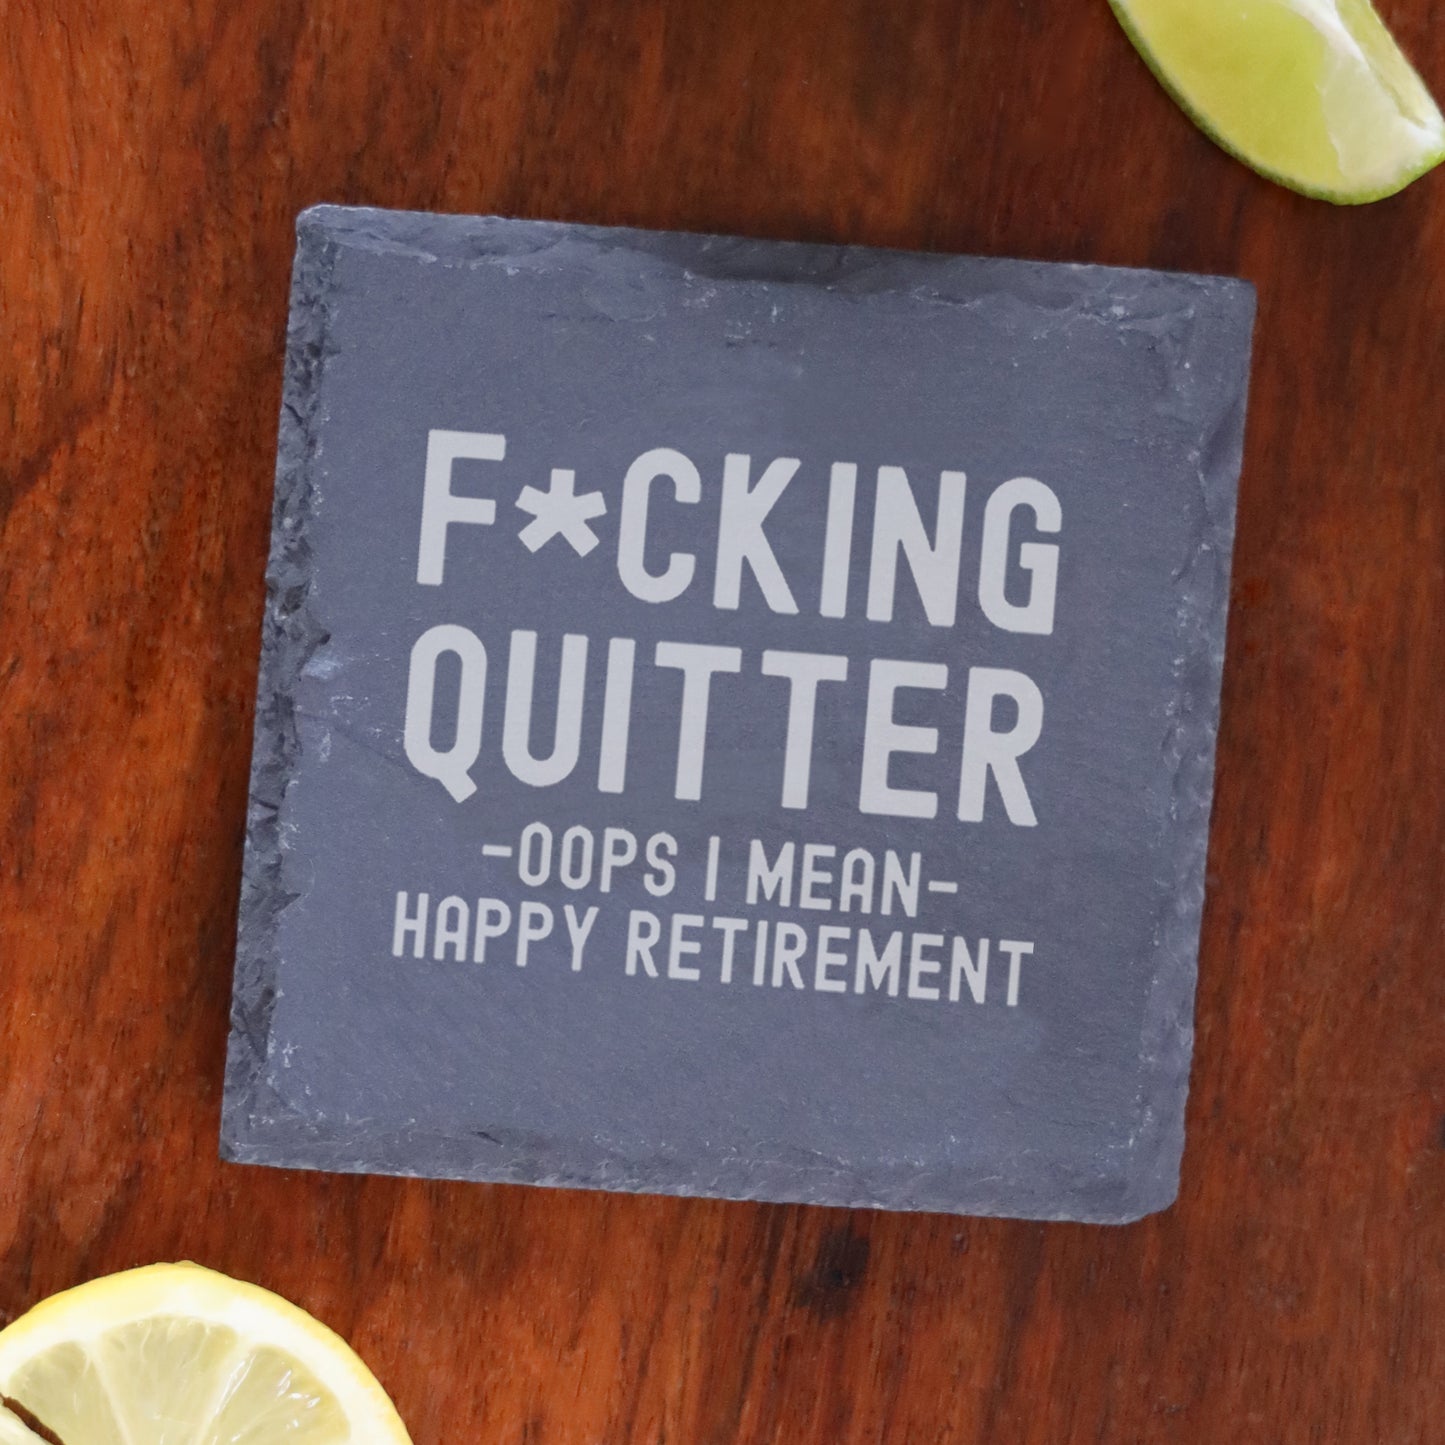 Engraved Funny "F*cking Quitter, Oops I mean Happy Retirement" Wine Glass and/or Coaster Novelty Gift  - Always Looking Good - Square Coaster Only  